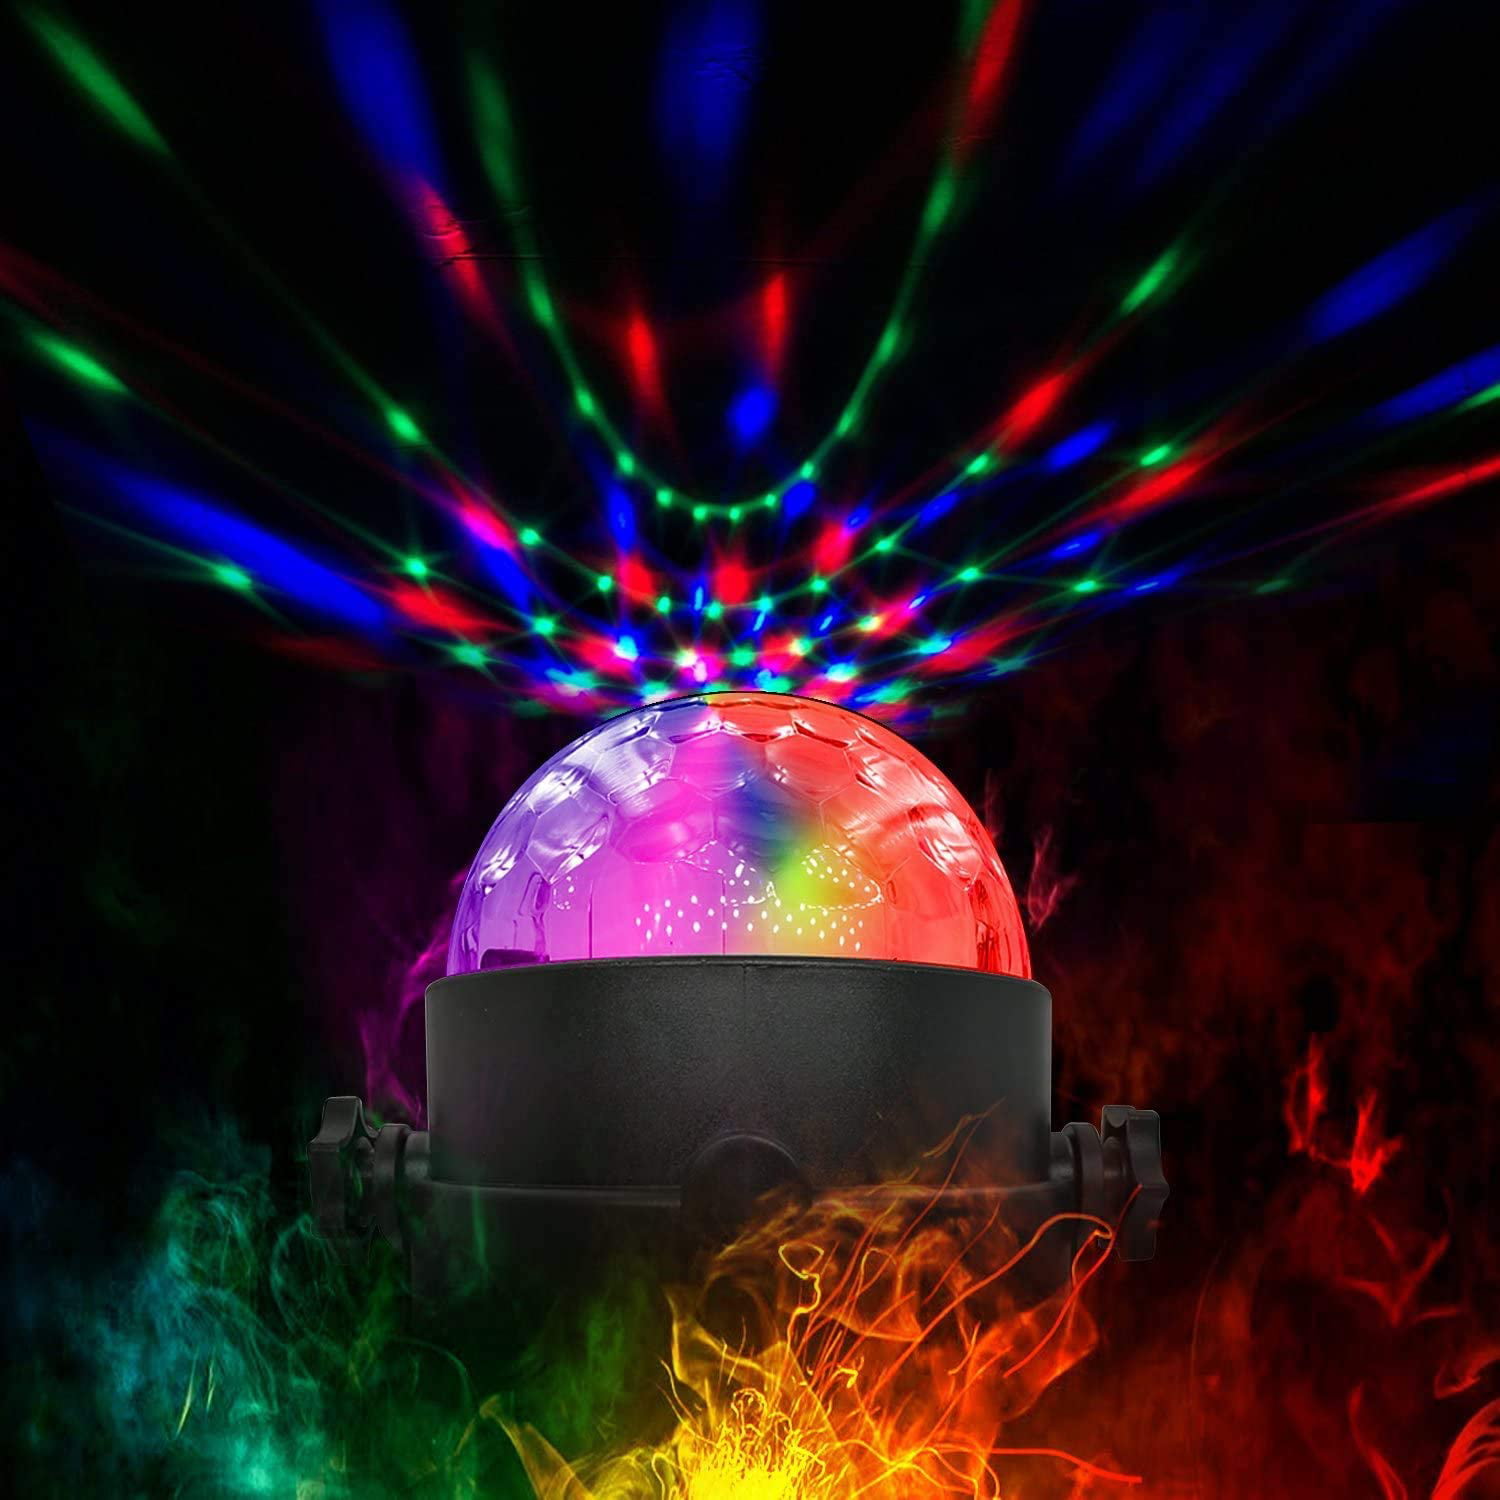 RBG Disco Ball Strobe Lamp Stage Par Light for Festival Bar Club Party Wedding Show Home Party Lights Disco Ball 7 Colors Sound Activated Party Lights with Remote Control Dj Lighting Disco Ball